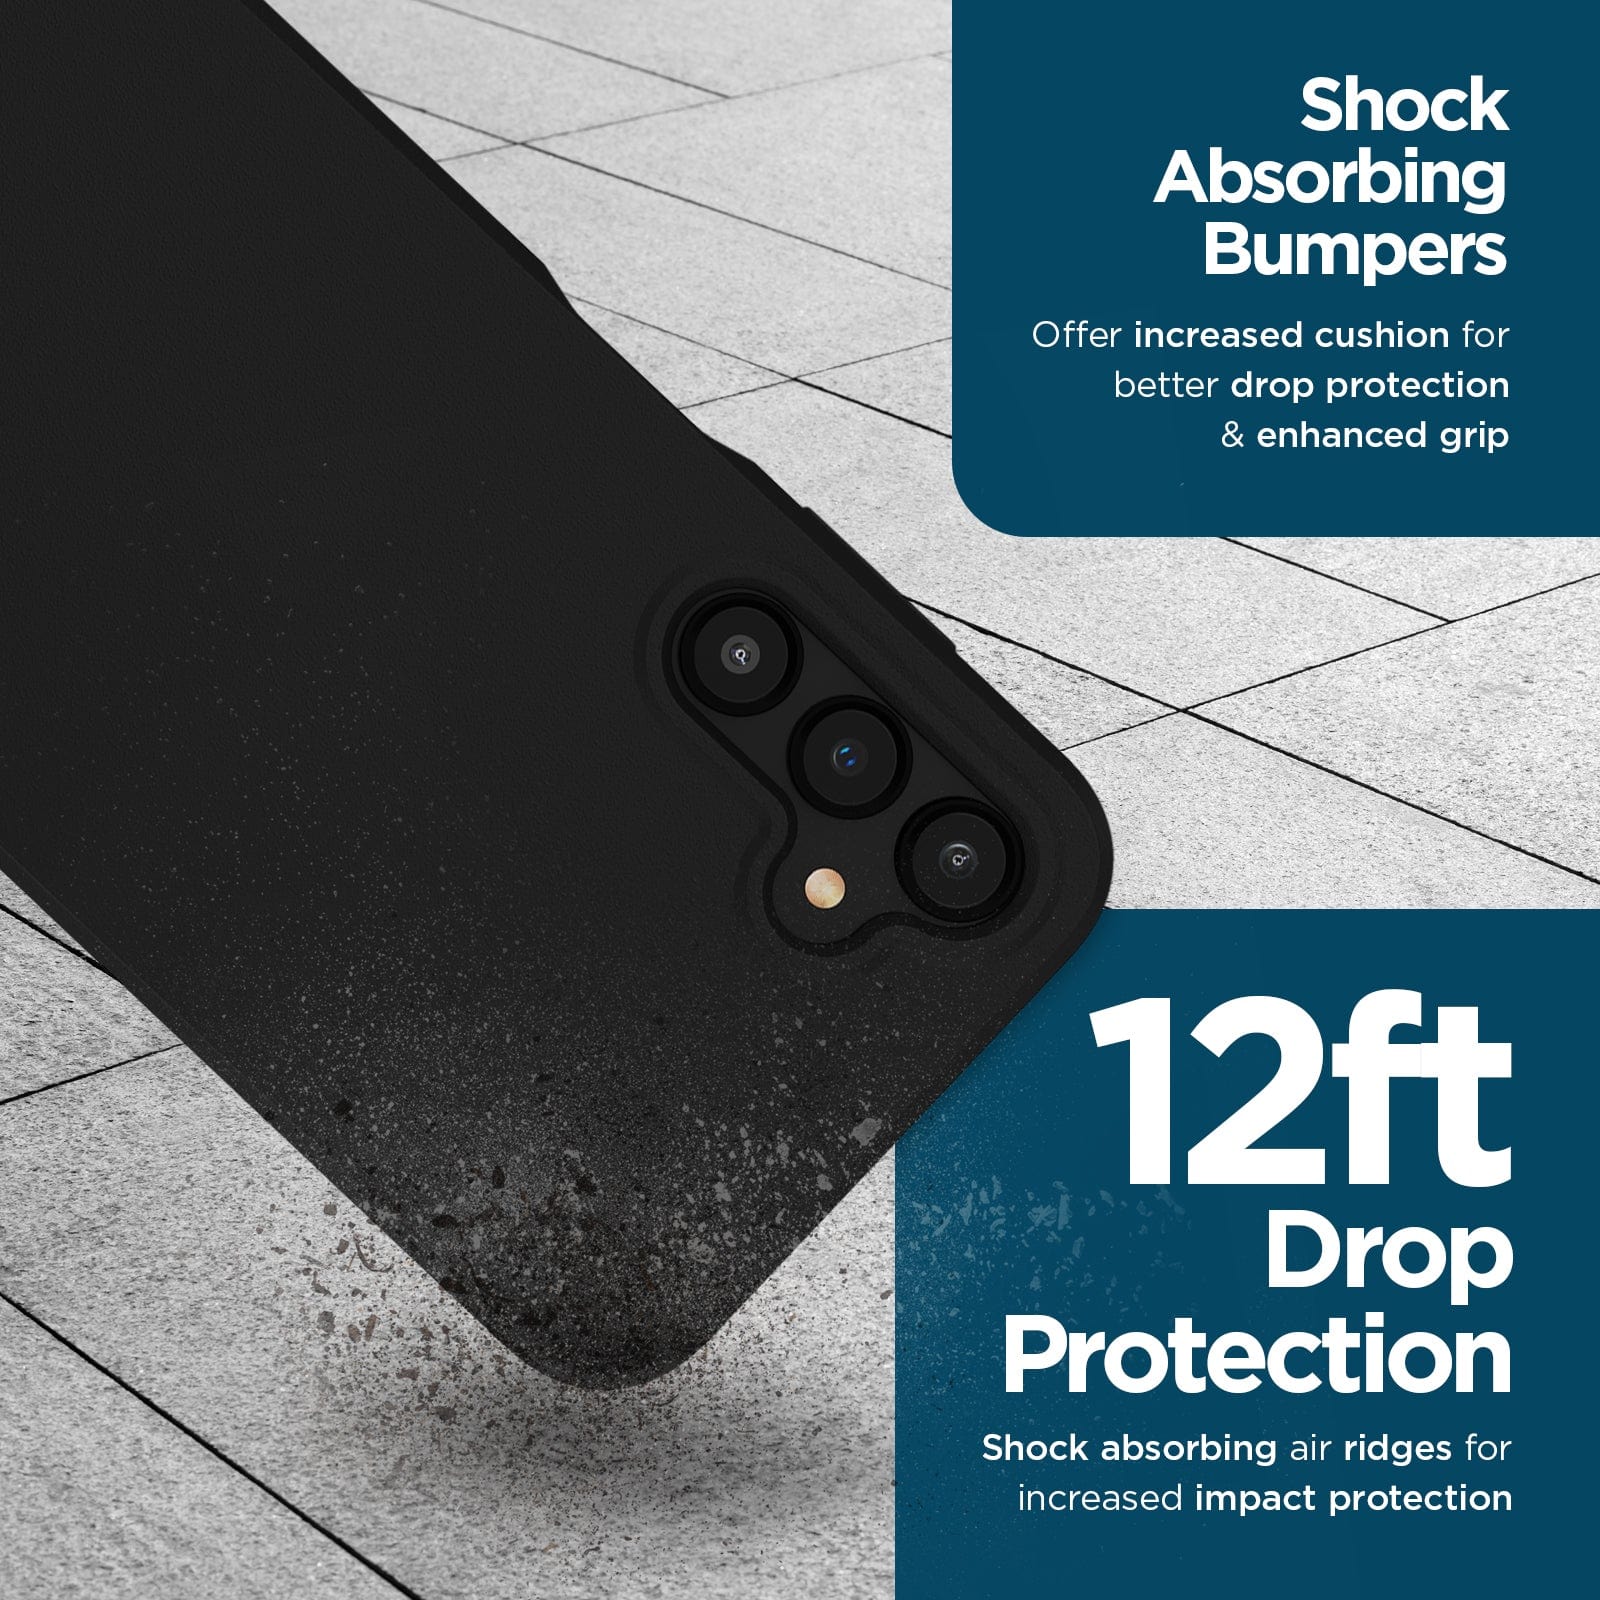 Shock absorbing bumpers. Offer increased cushion for better drop protection & enhanced grip. 12ft drop protection. Shock absorbing air ridges for increased impact protection. 